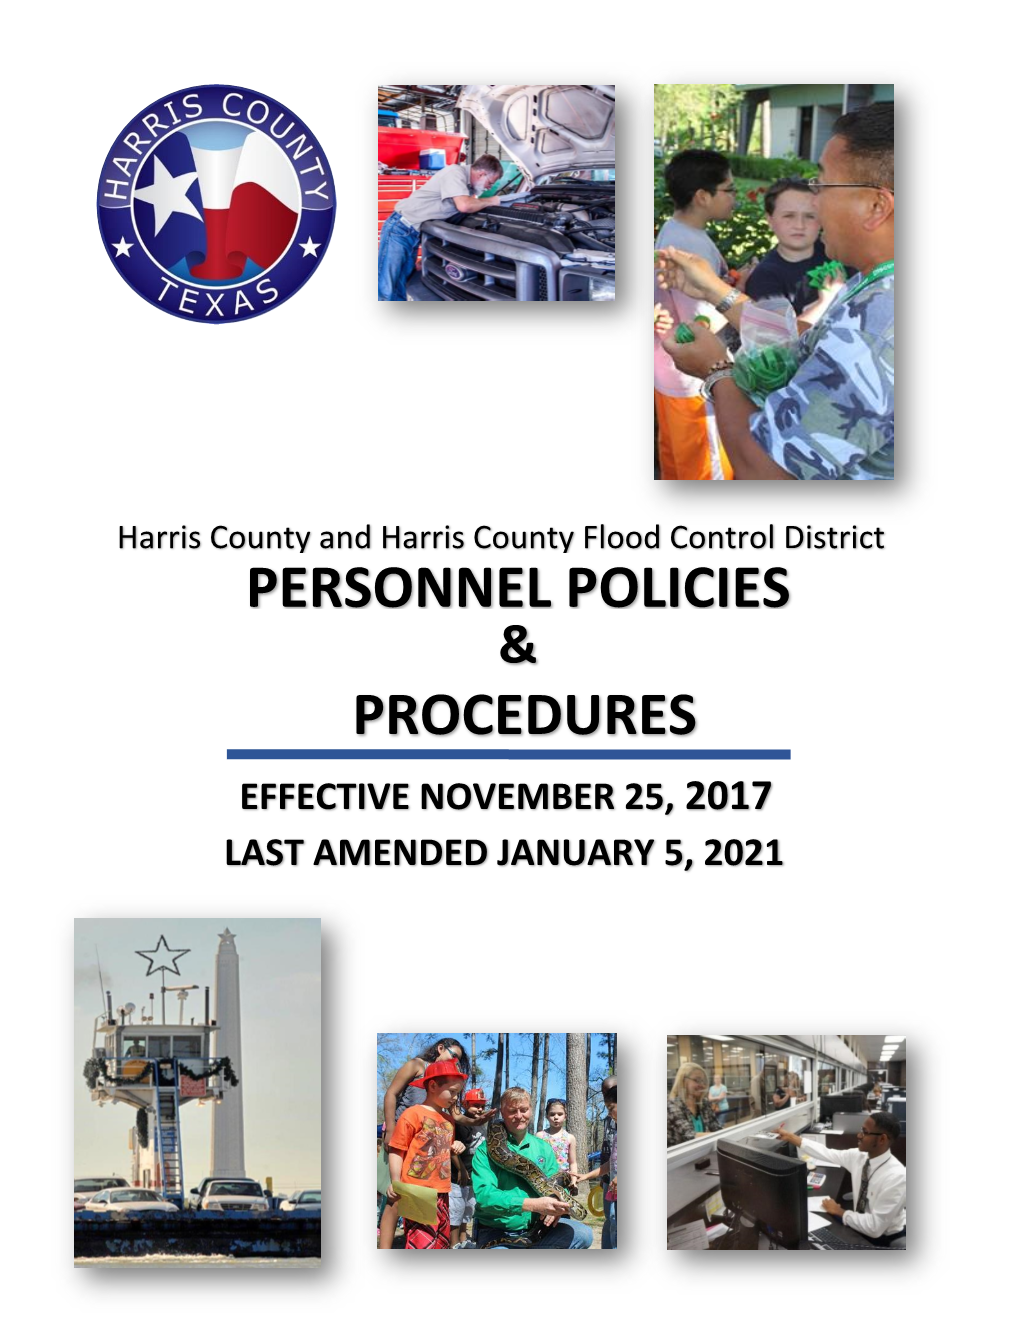 Personnel Policies & Procedures | Last Amended January 5, 2021